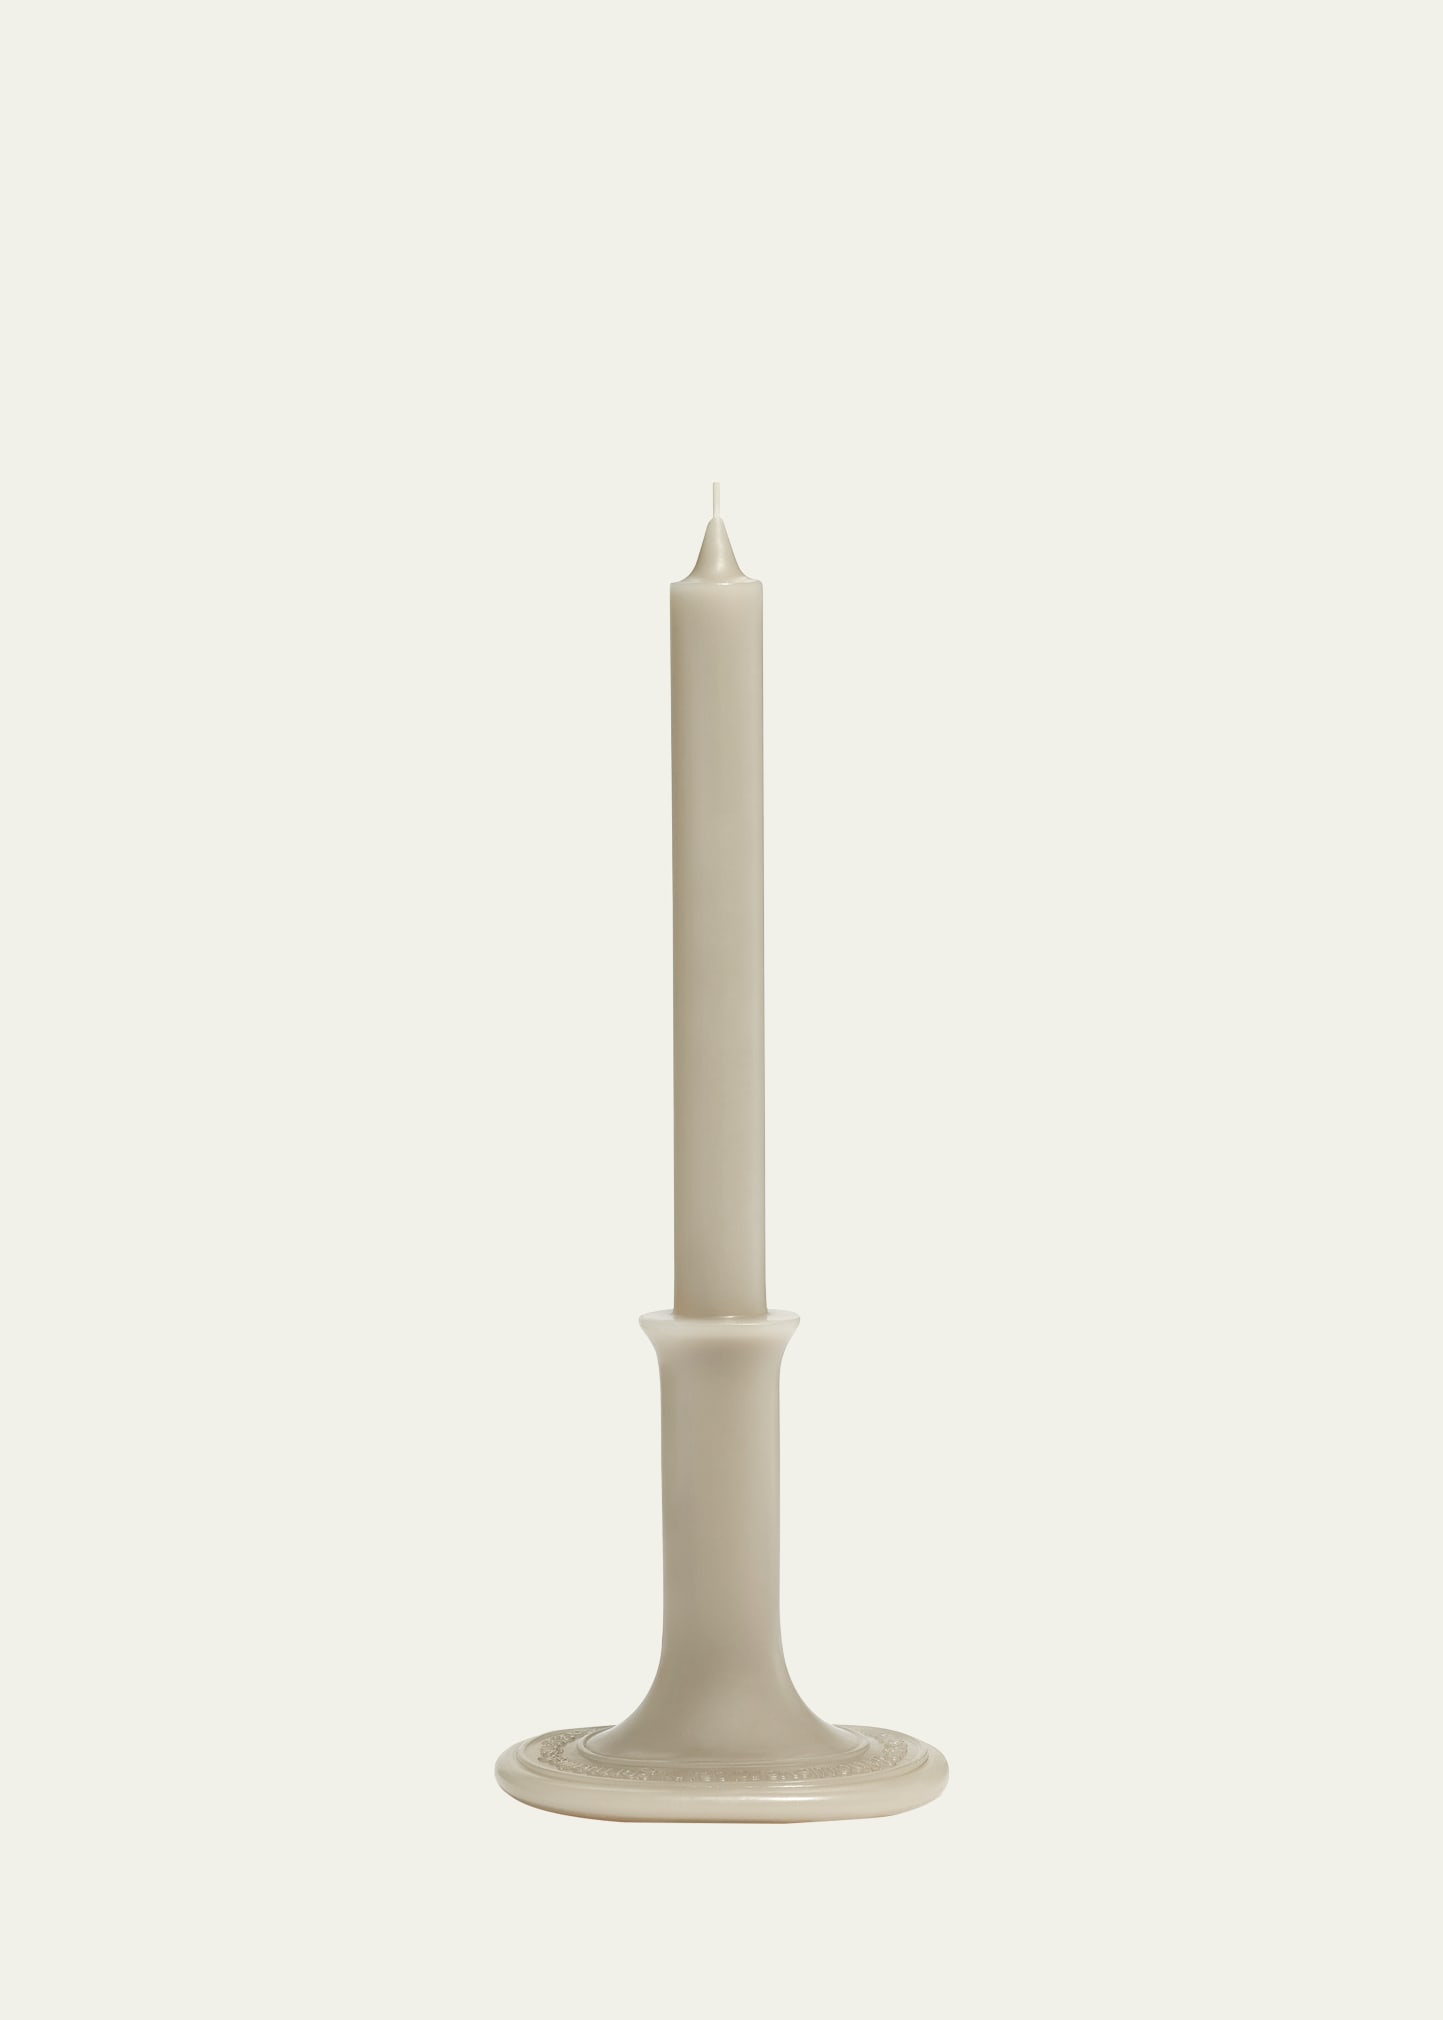 Feu de Bois (Firewood) Holiday Tapered Candle - Limited Edition